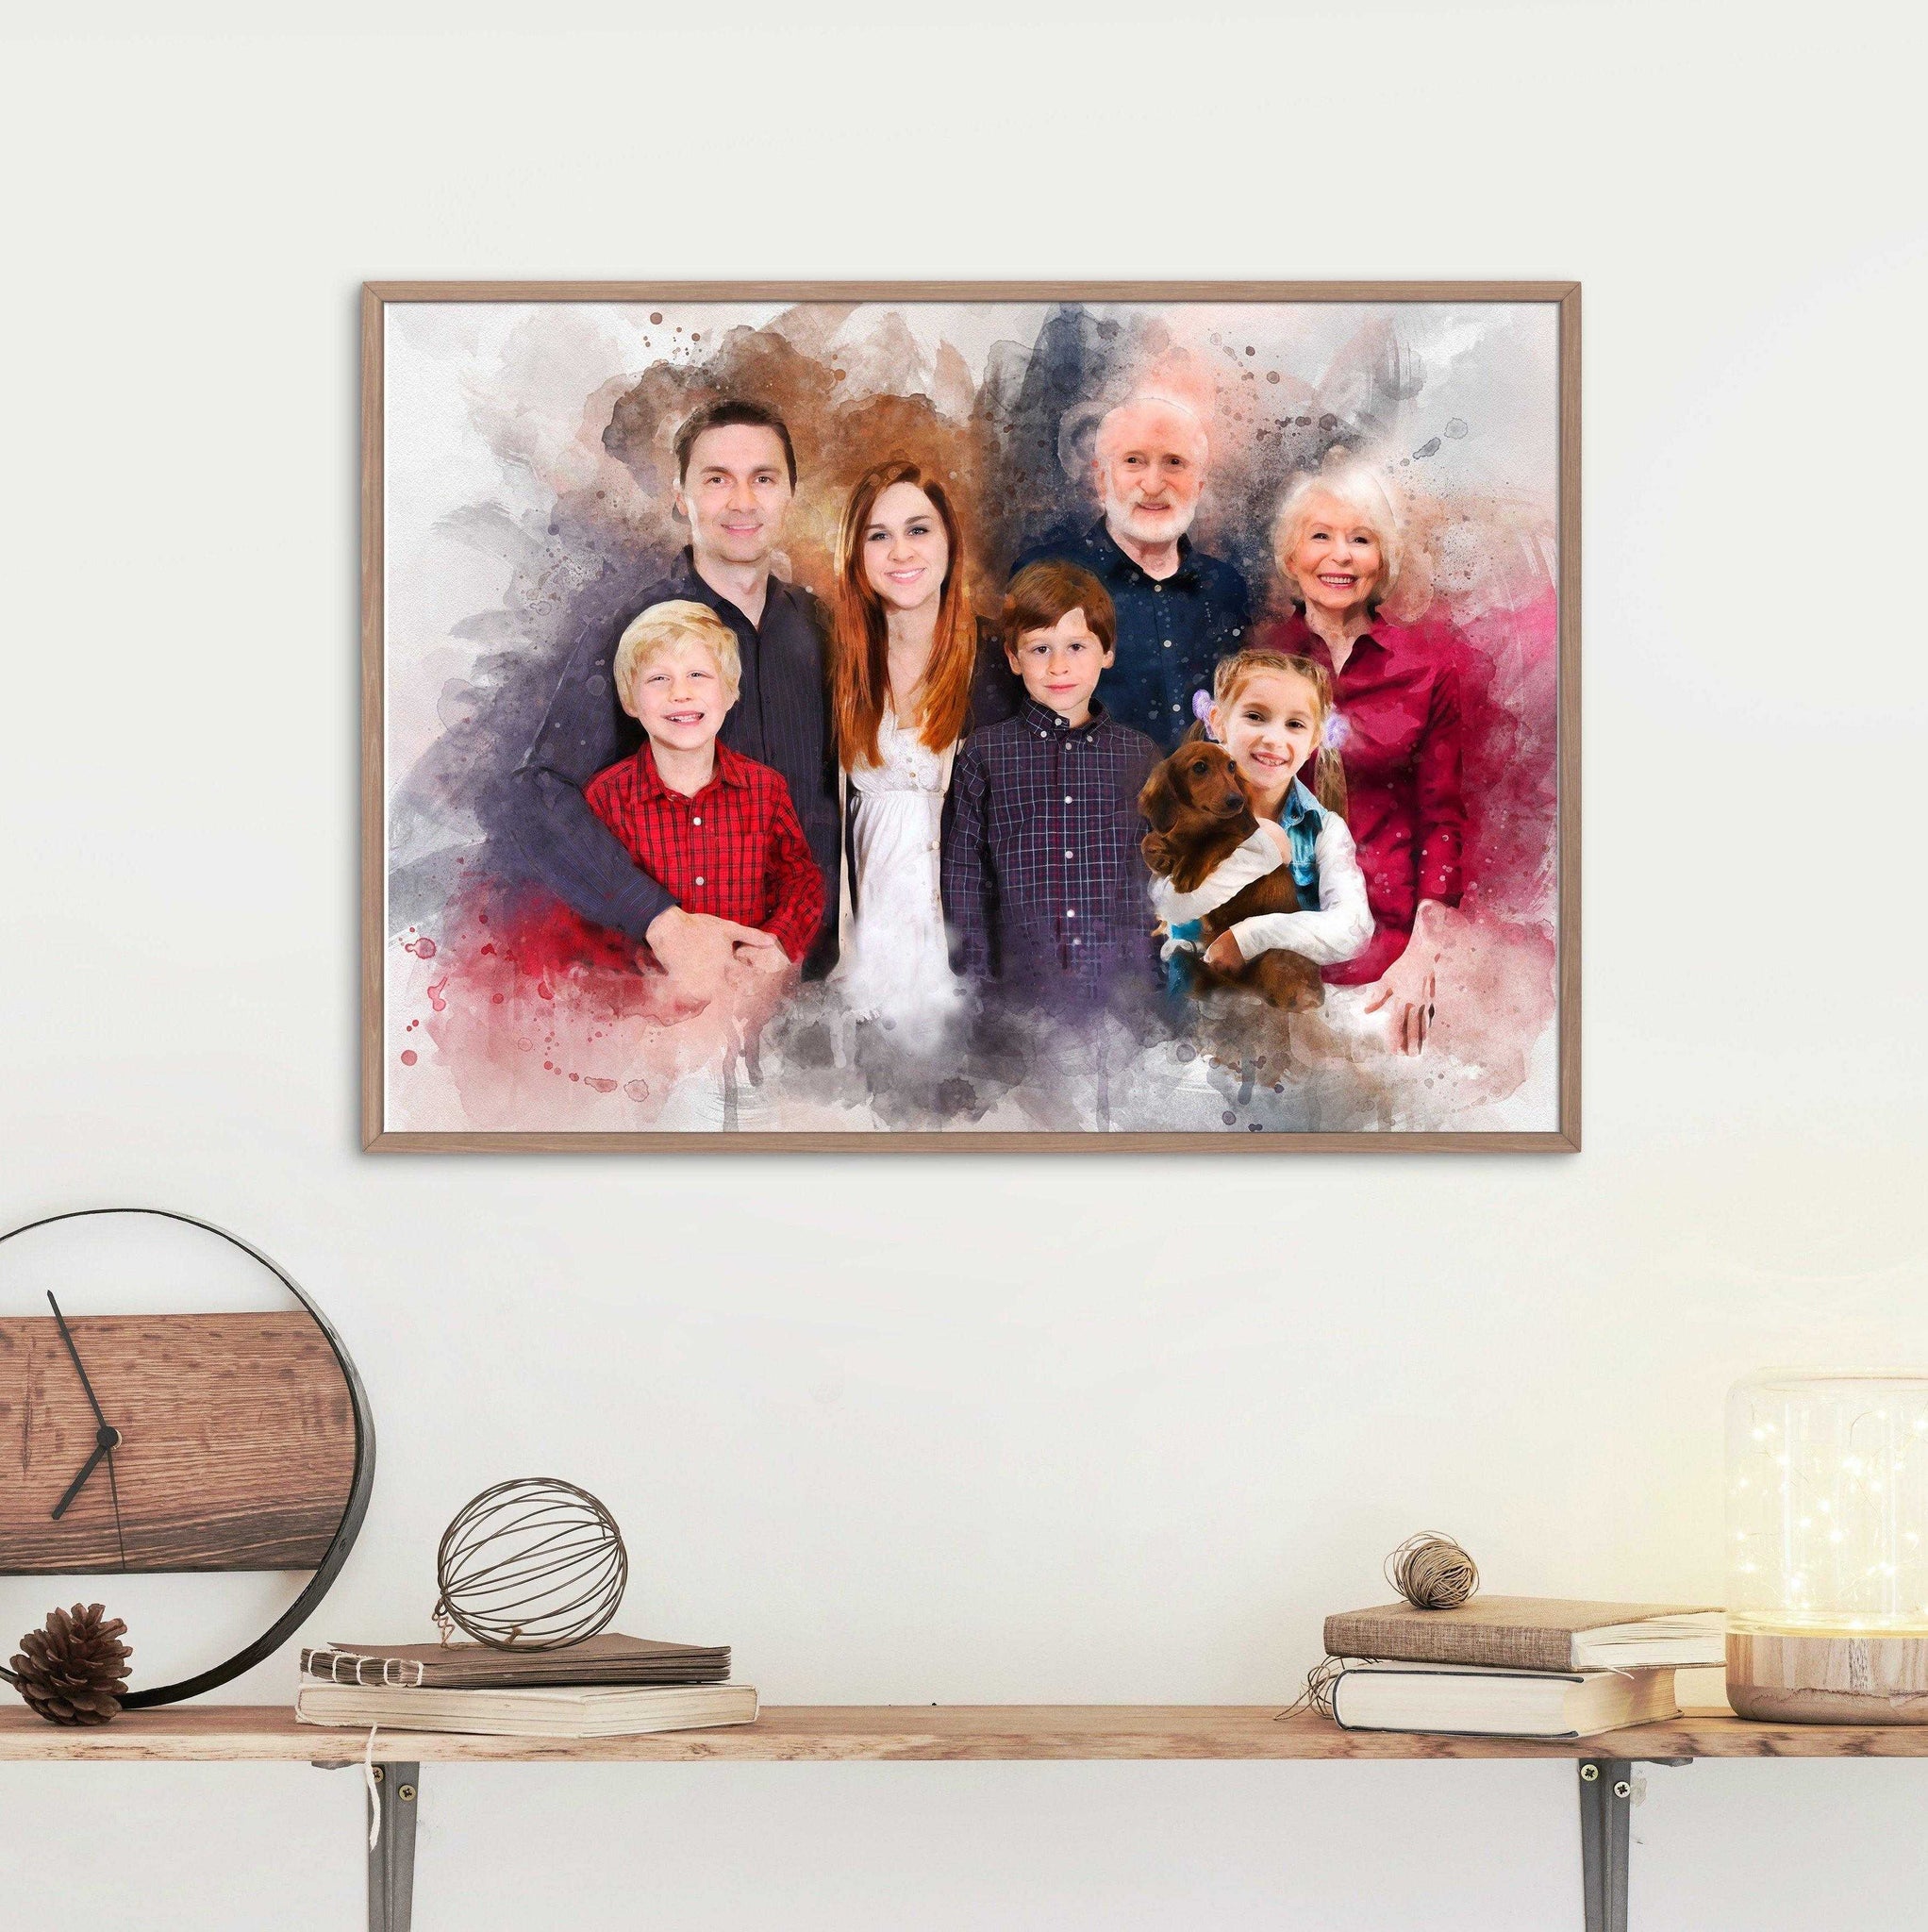 Family Portrait with Deceased | We paint your Custom Family Portrait with all your Deceased Loved Ones - FromPicToArt